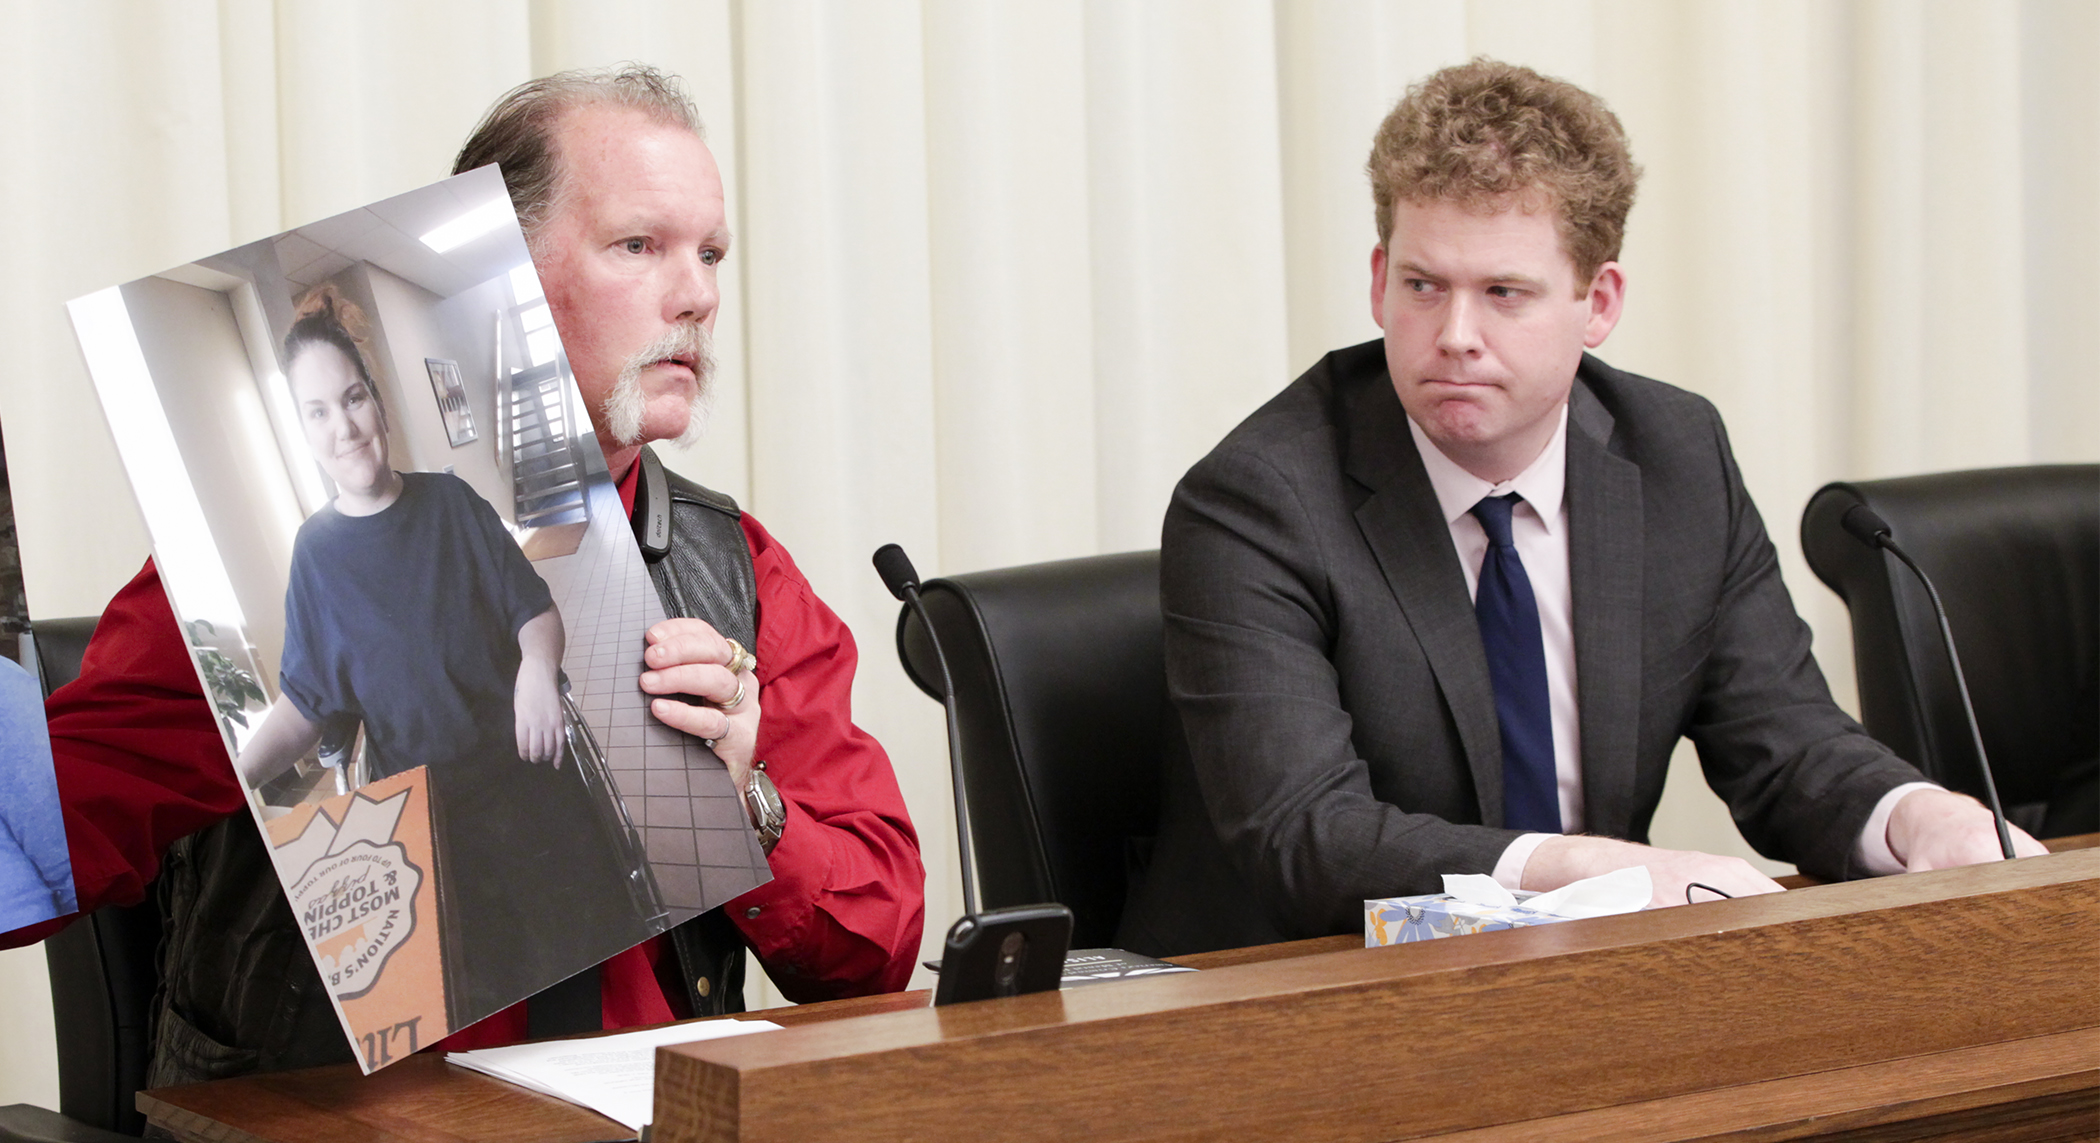 Tim Barry holds a picture of his daughter Cassy as he testifies in the House Public Safety and Criminal Justice Reform Finance and Policy Division on HF474, sponsored by Rep. Zack Stephenson, right. Photo by Paul Battaglia